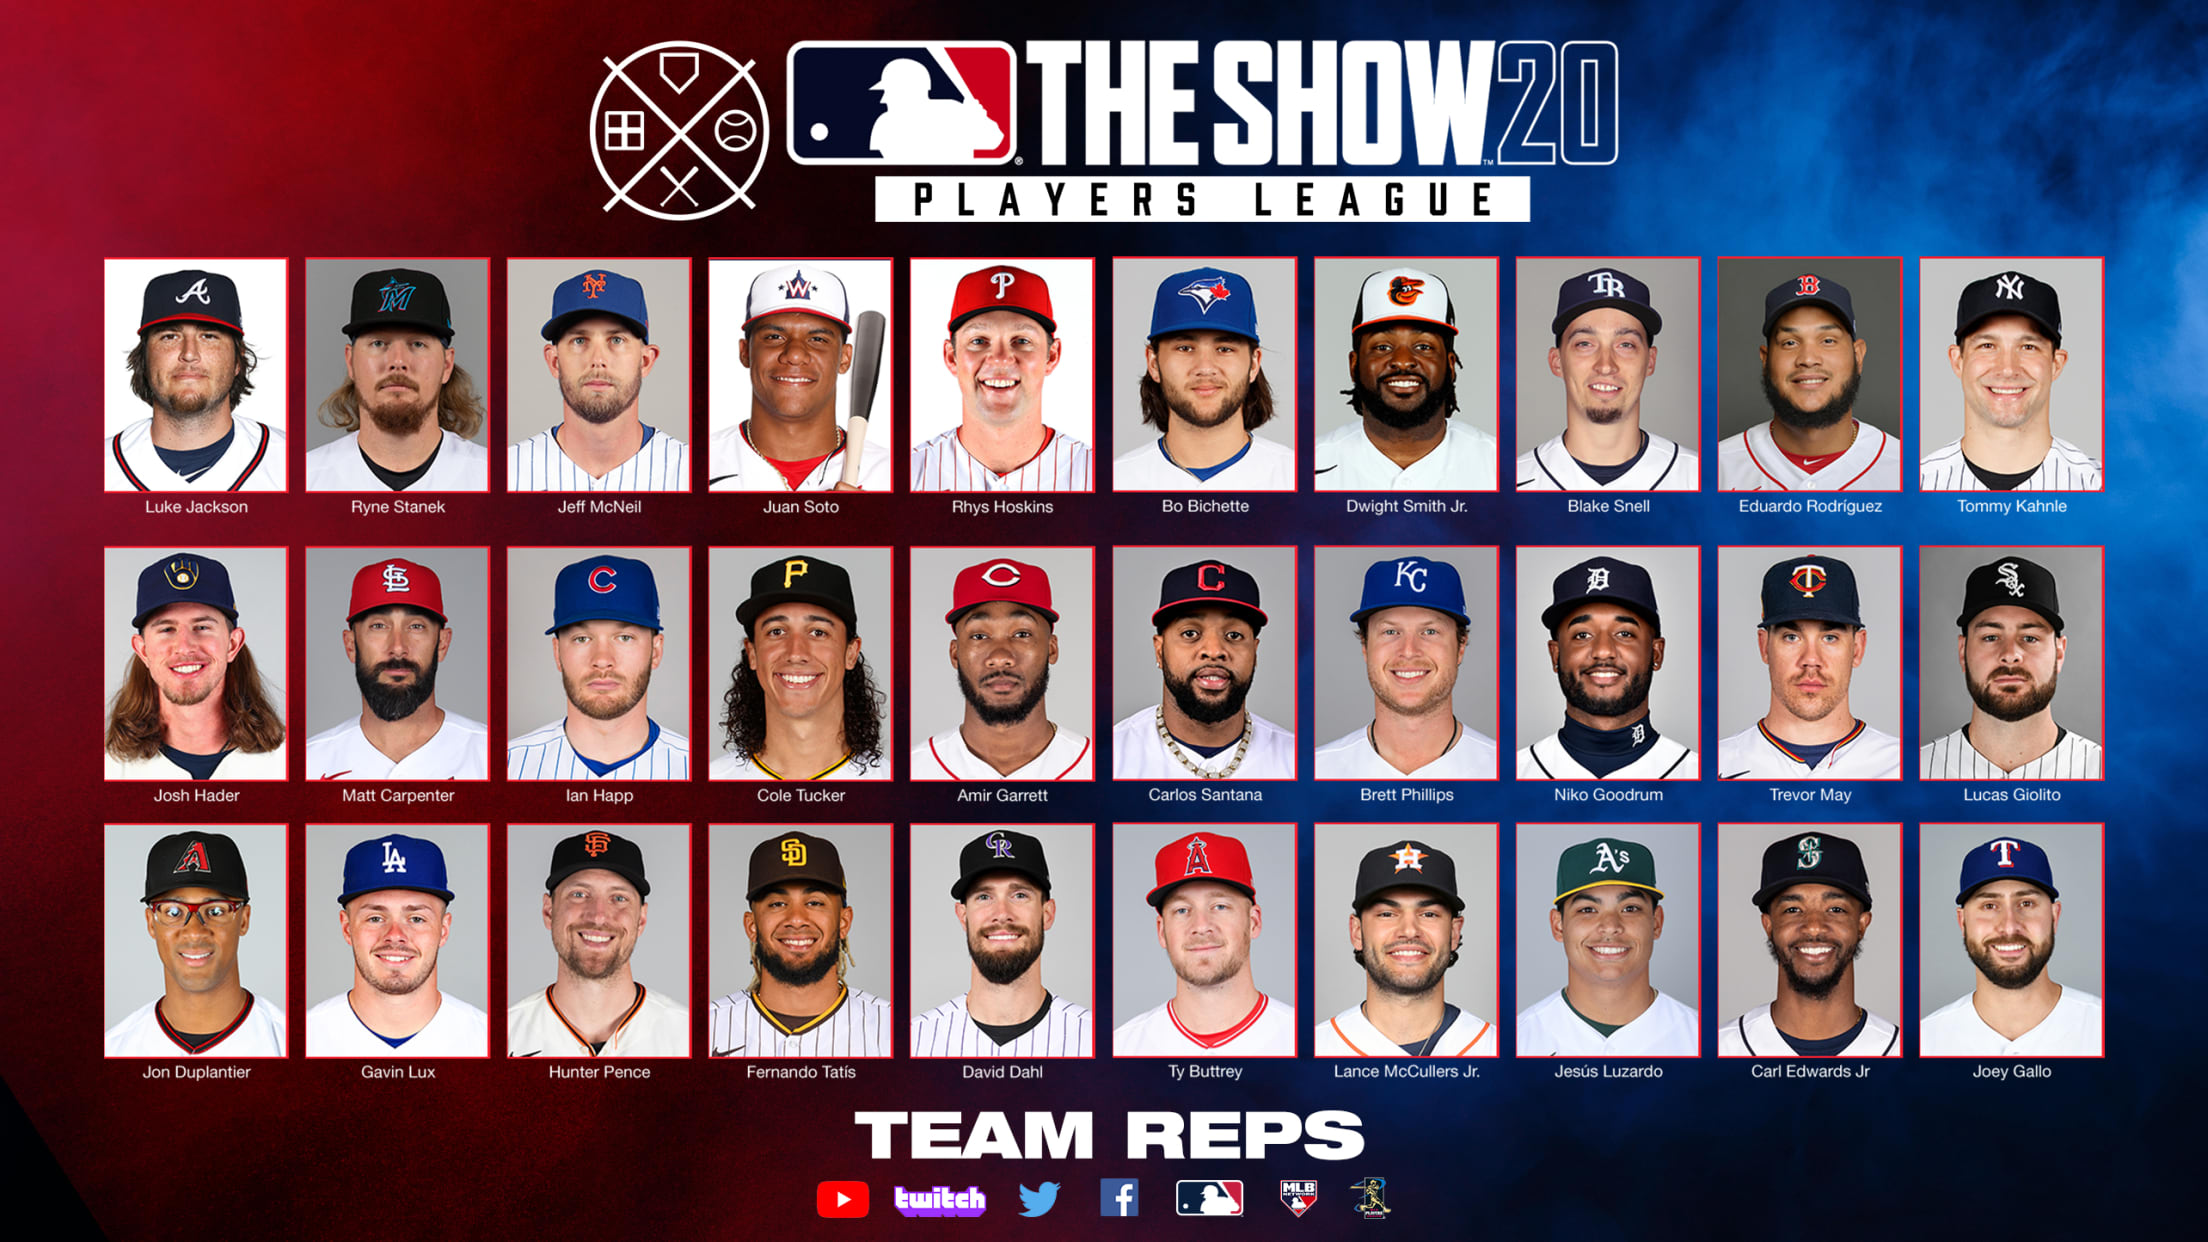 MLB The Show to Launch League With Players from All 30 Teams Den of Geek